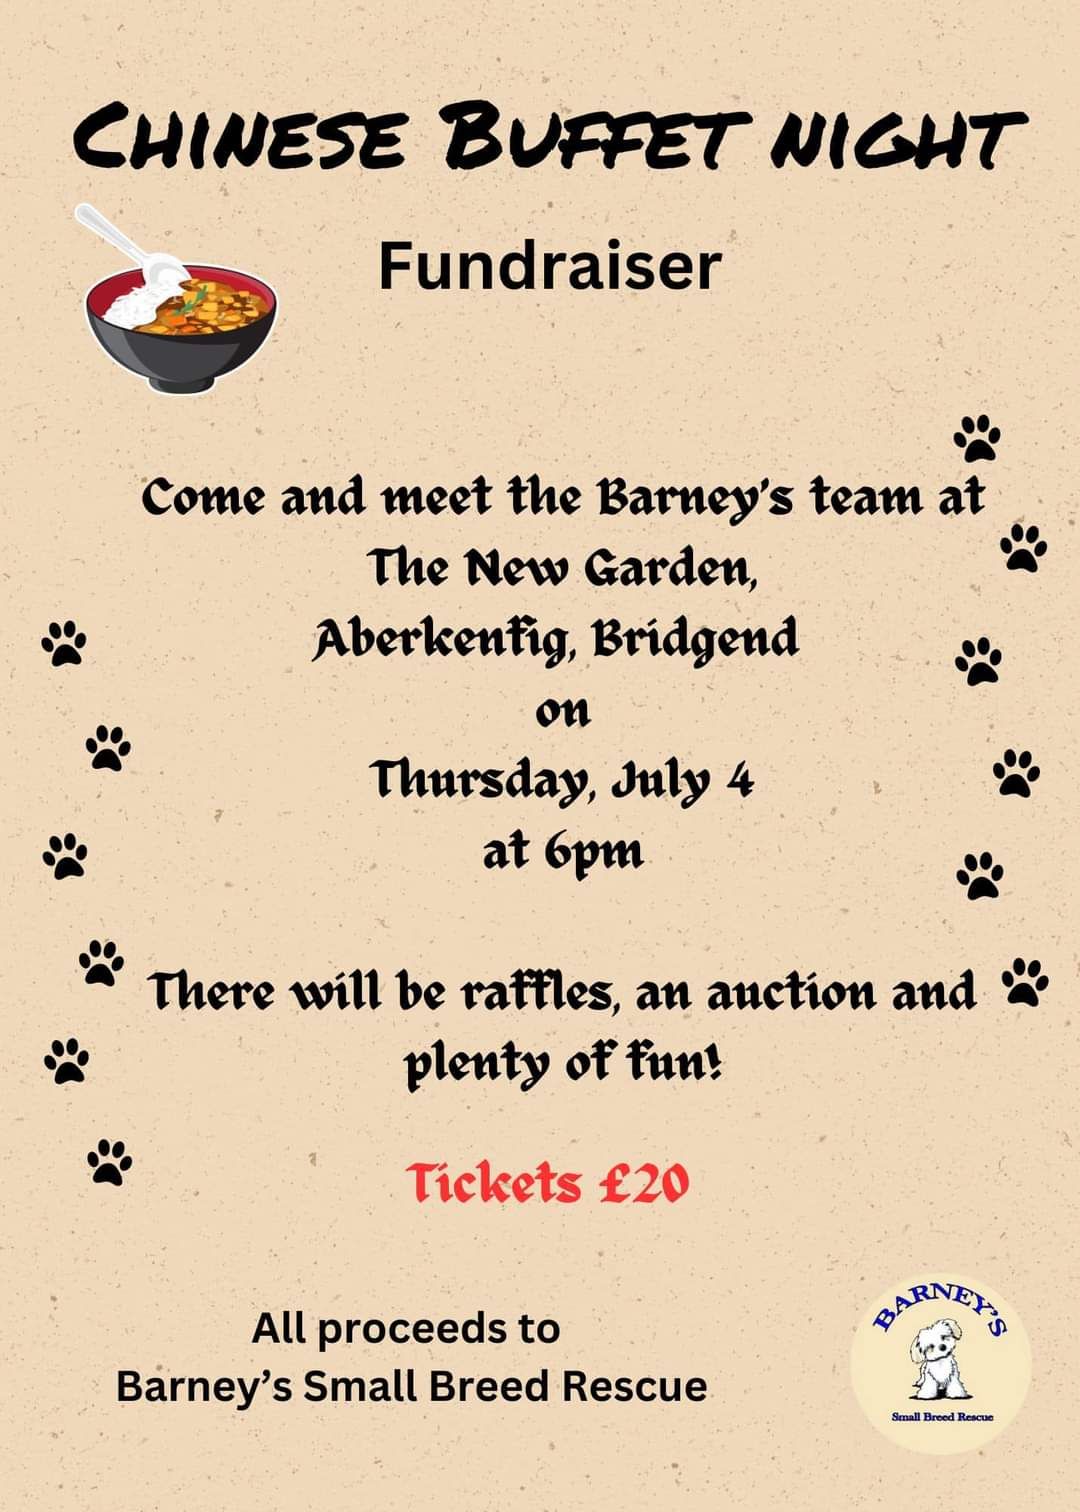 CHINESE NIGHT FUNDRAISER FOR BARNEY'S SMALL BREED RESCUE 